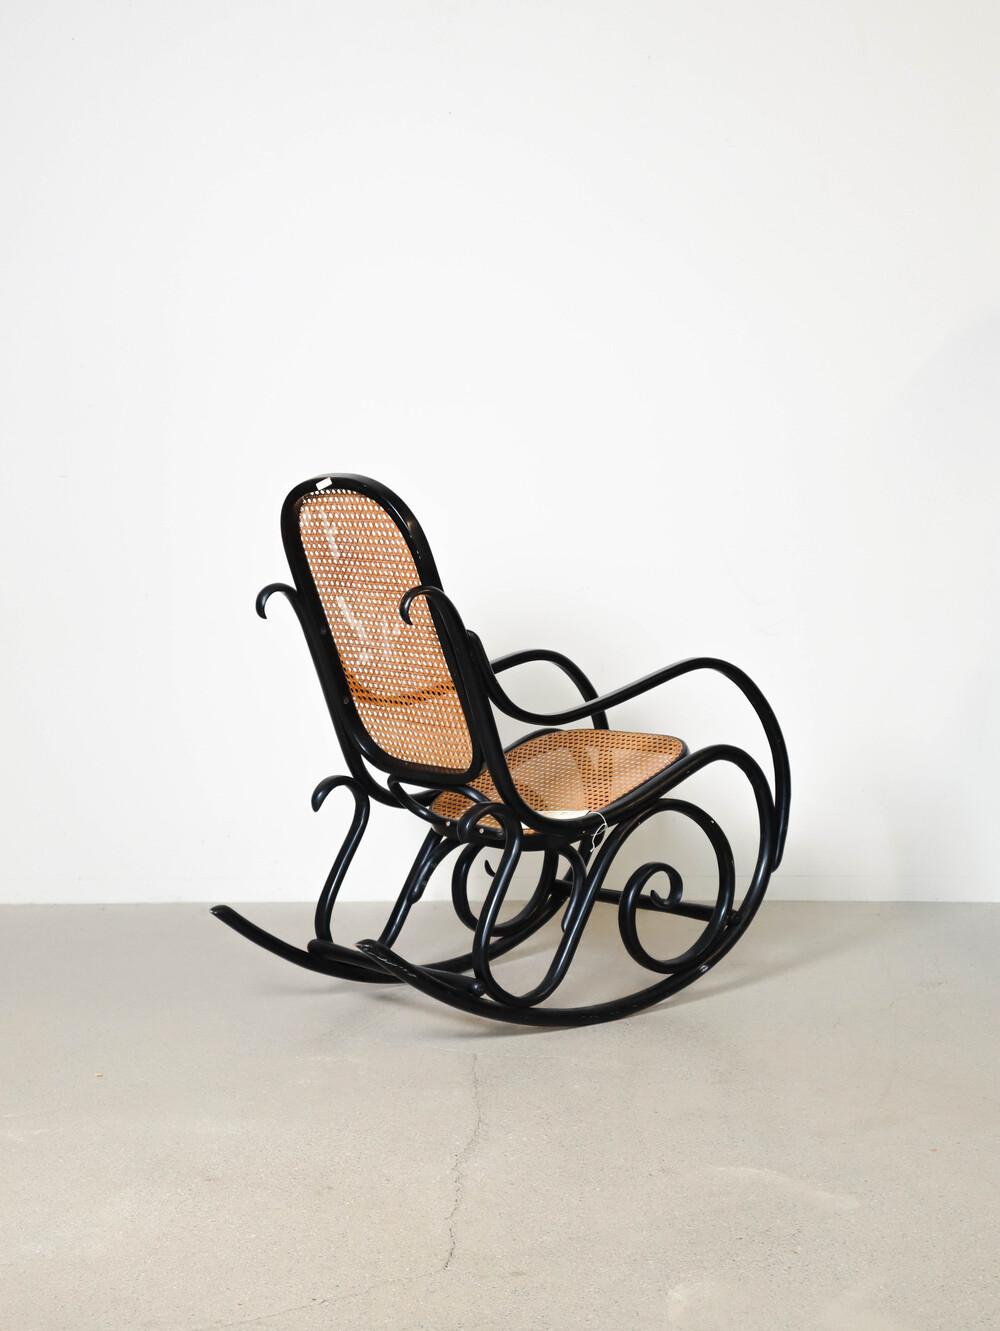 N0.21 Rocking Chair by Michael Thonet In Good Condition For Sale In Princeton Junction, NJ